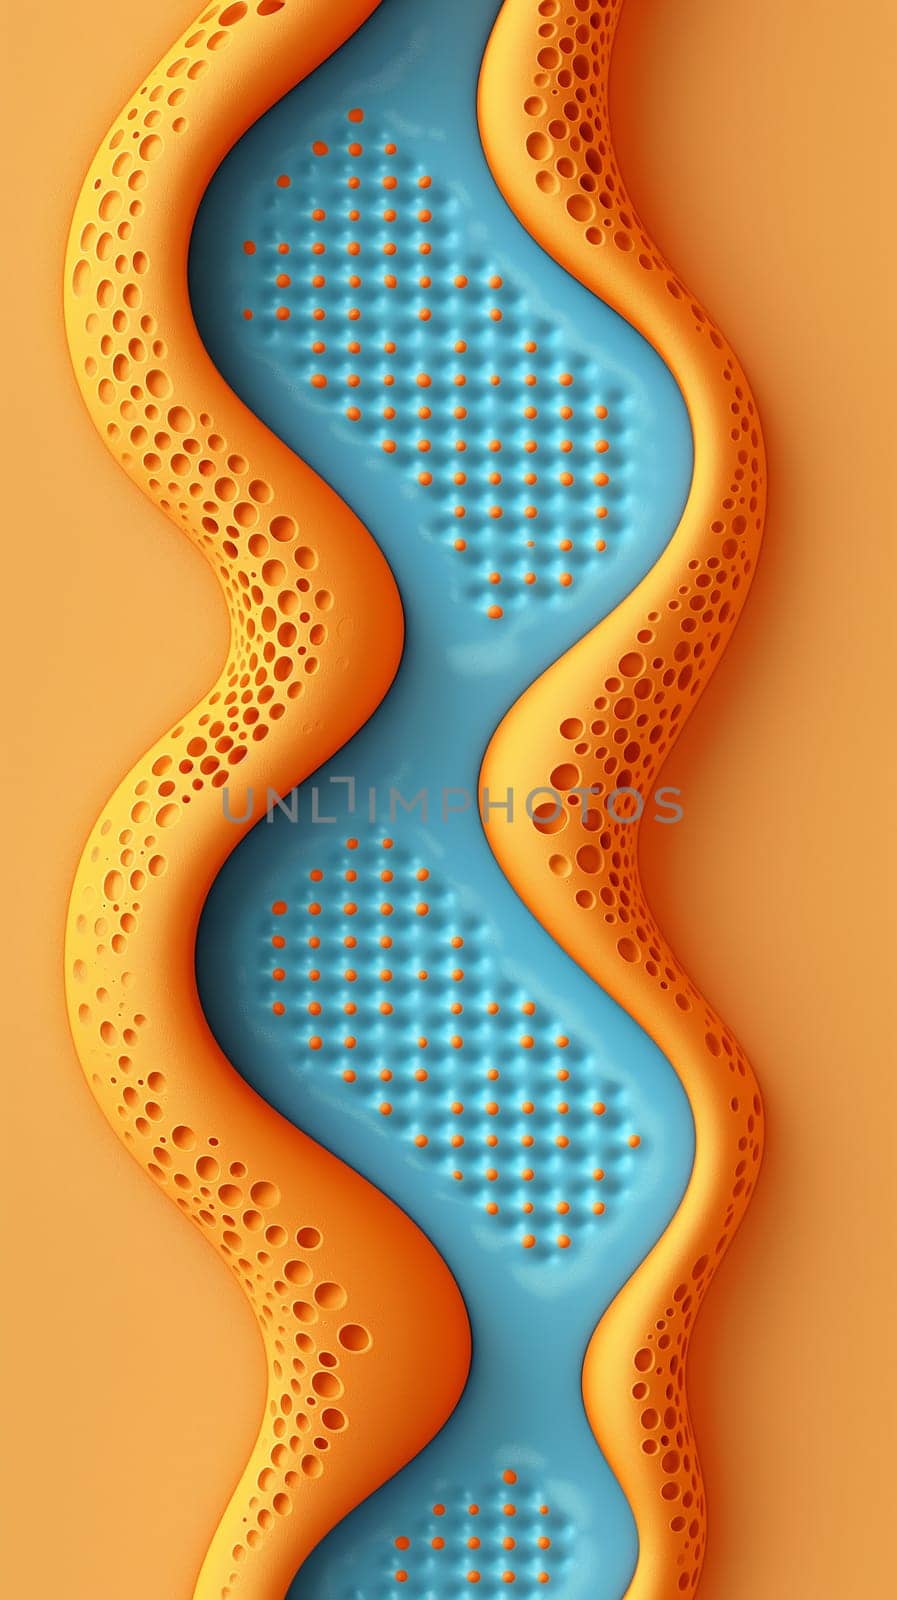 Abstract Wavy Structure With Orange and Blue Color Scheme by chrisroll